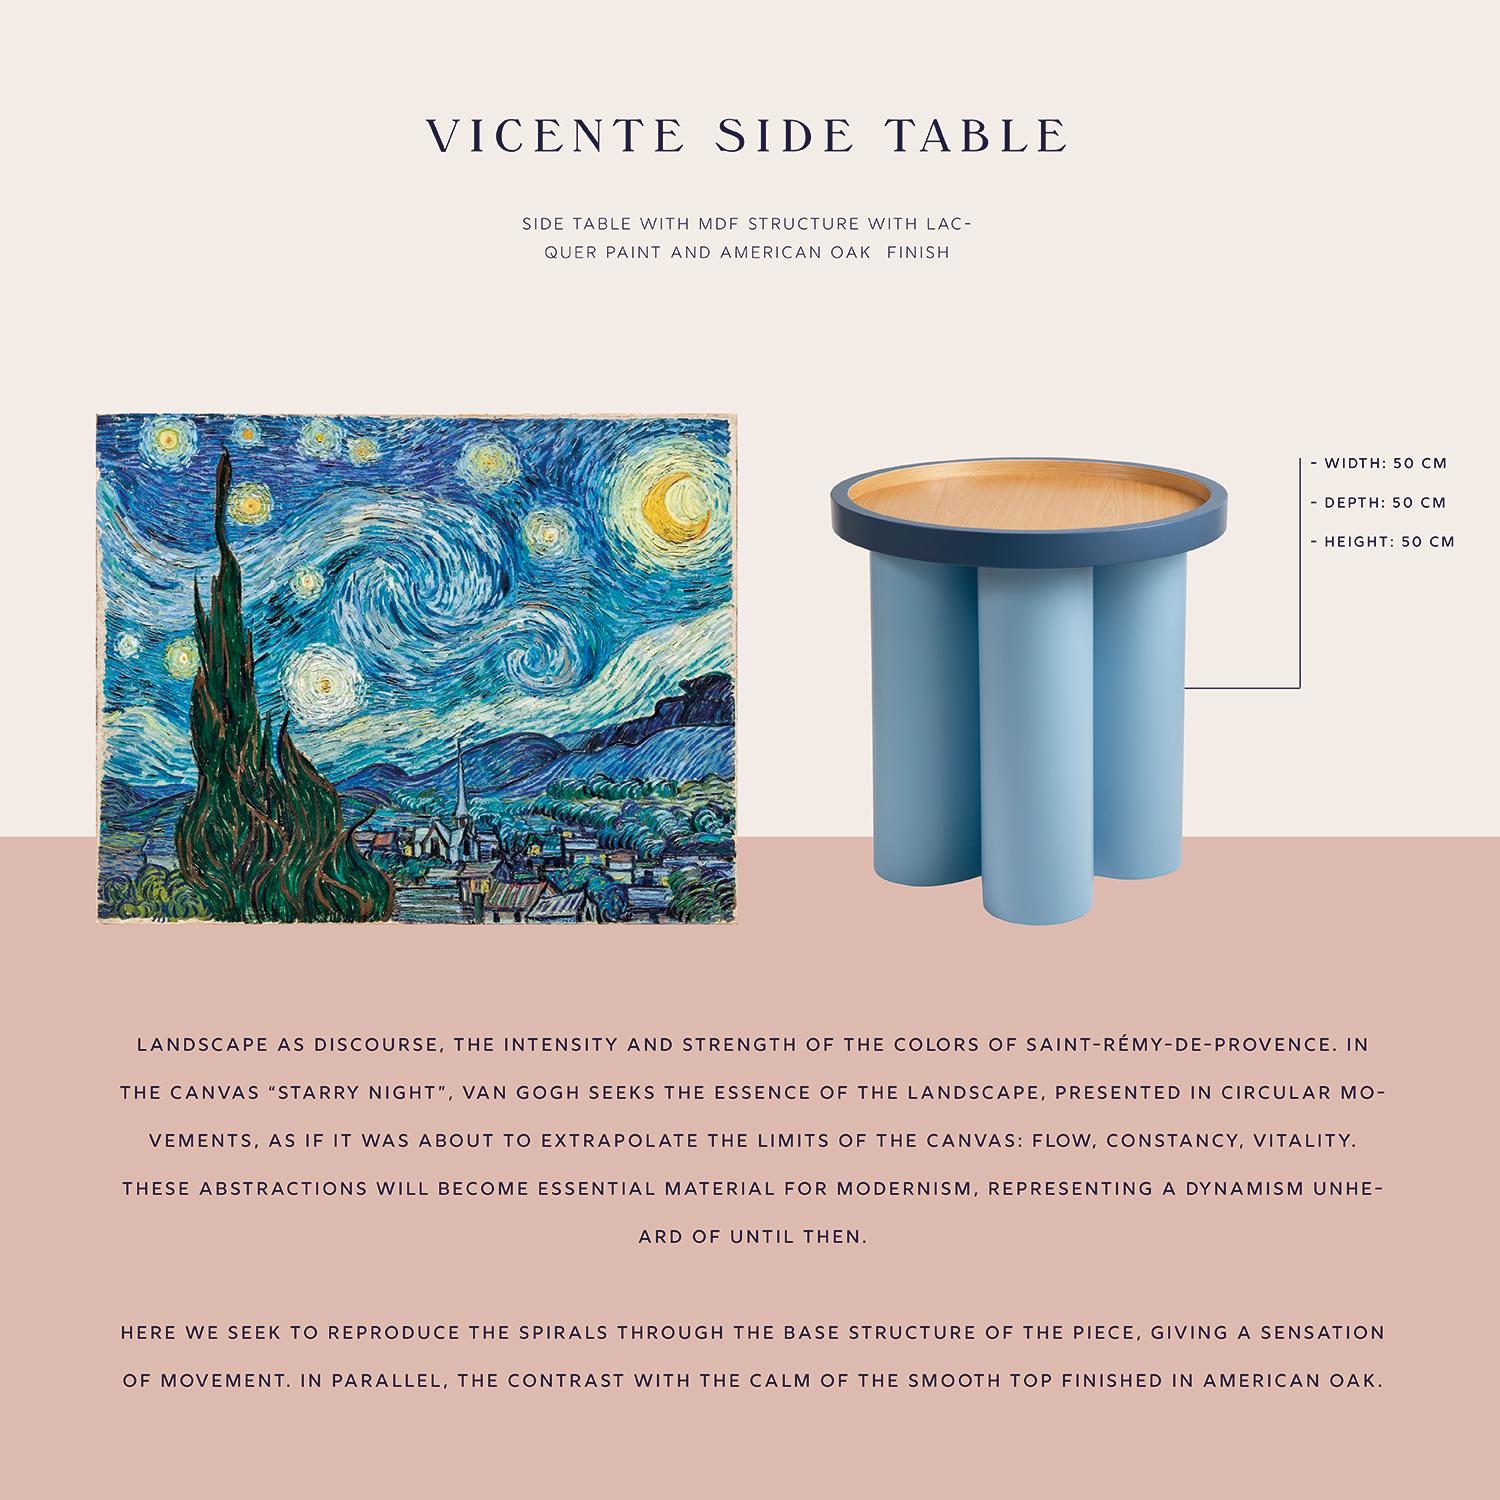 Wood Vicente Side Table For Sale